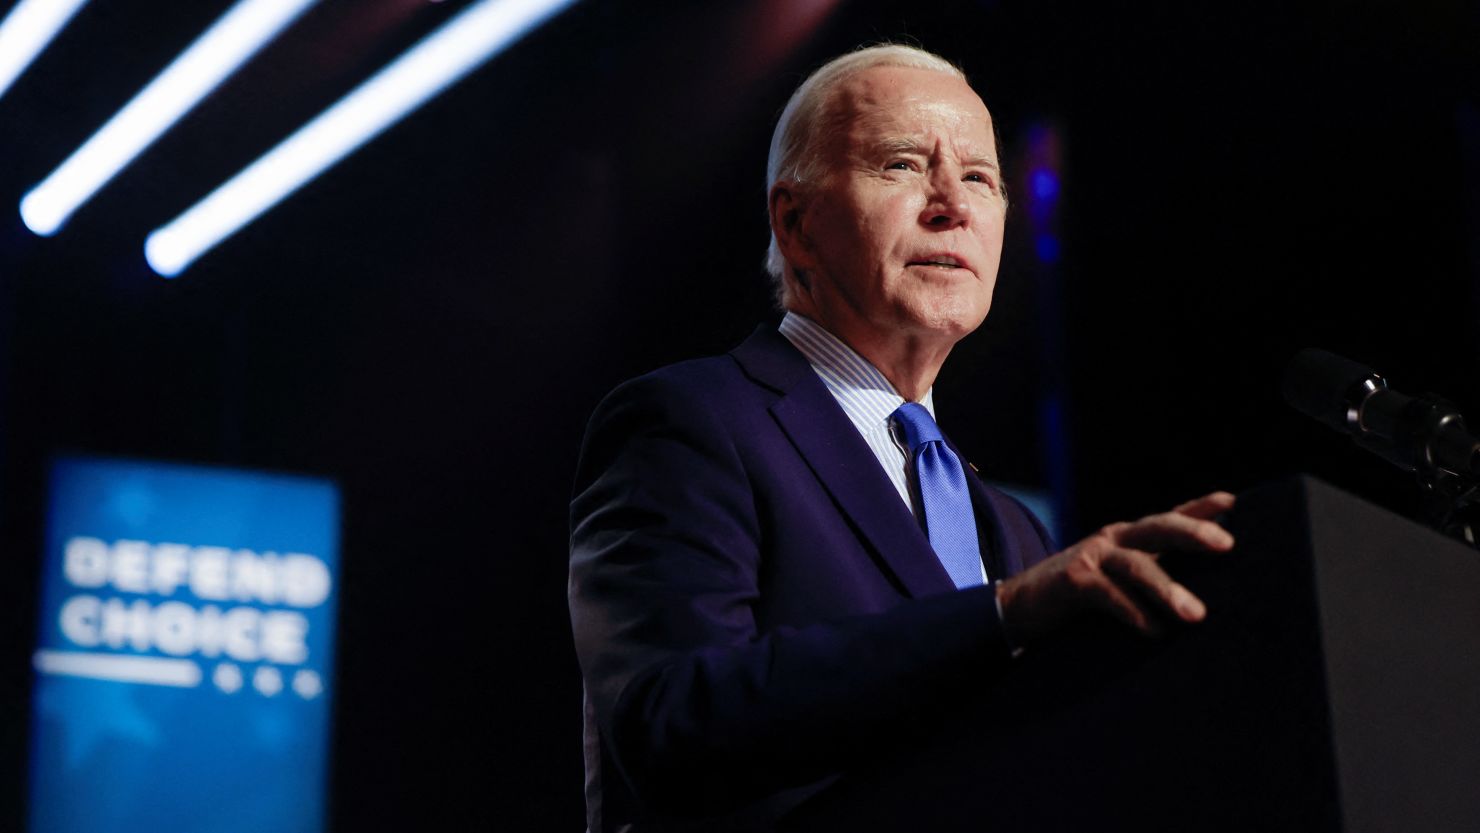 President Joe Biden delivers remarks at a campaign event focused on abortion rights at in Manassas, Virginia, on January 23, 2024.